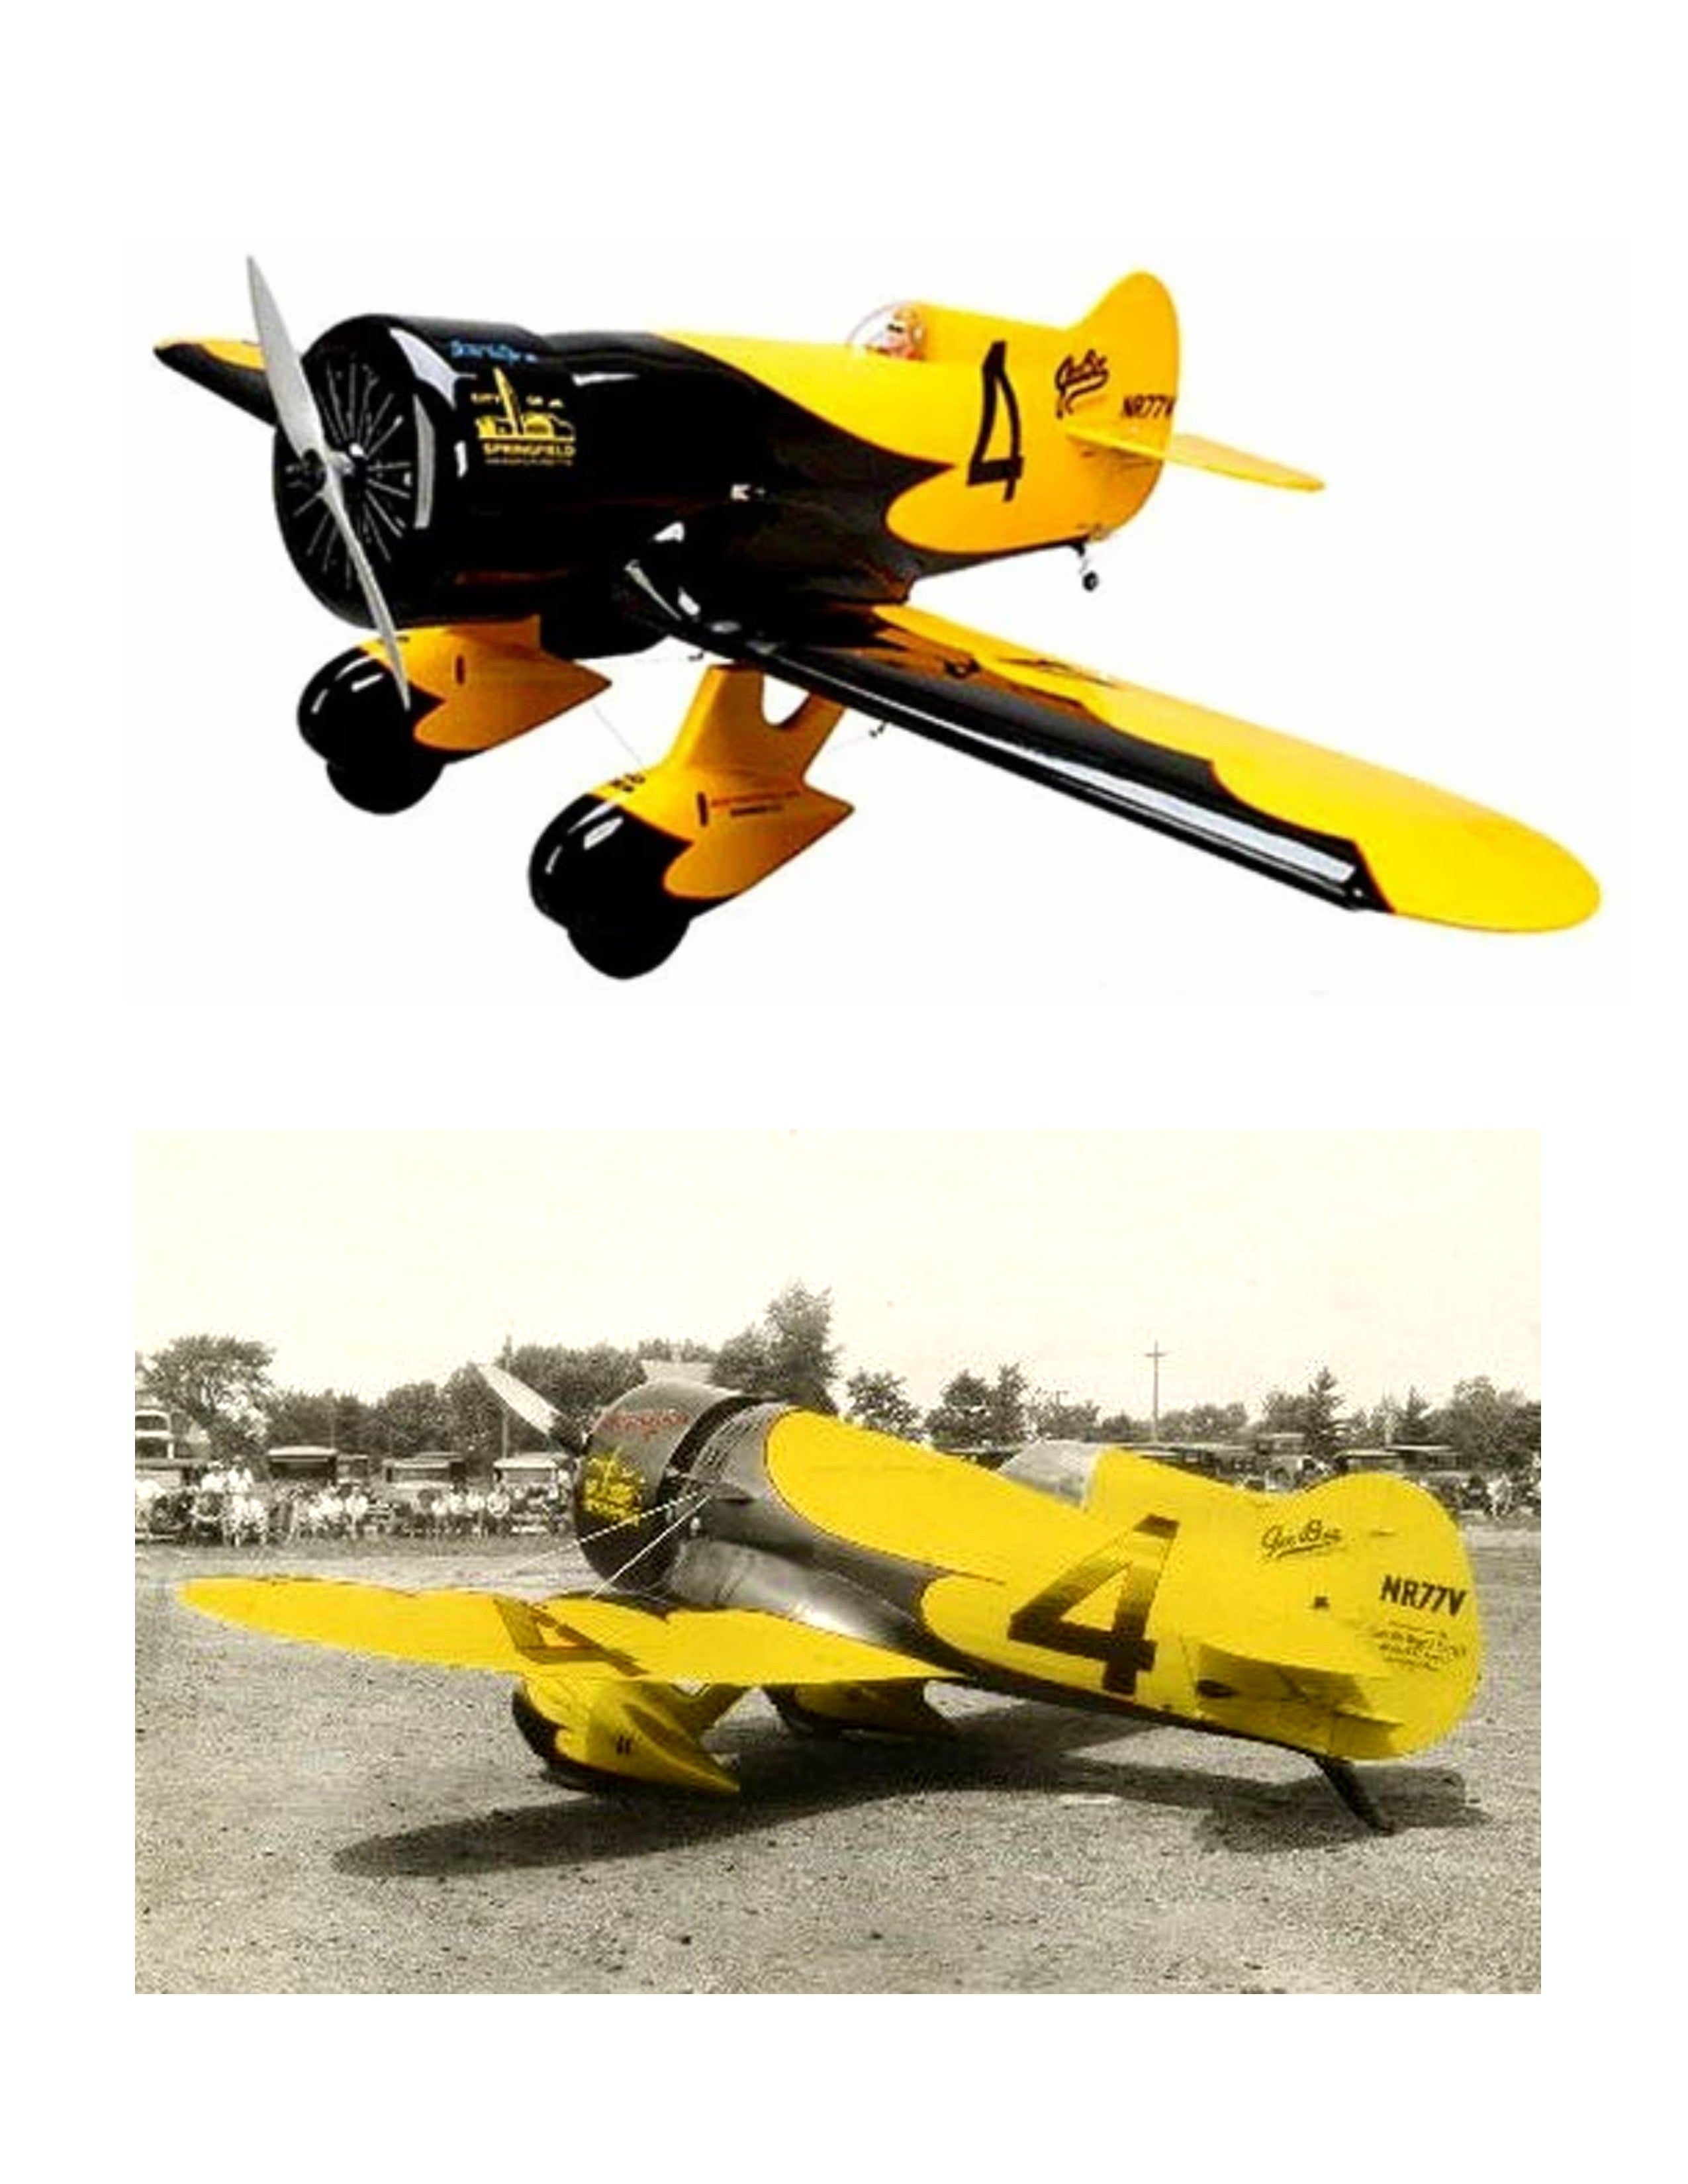 full size printed plans scale 1:10  control line gee-bee stable and smooth flying model;